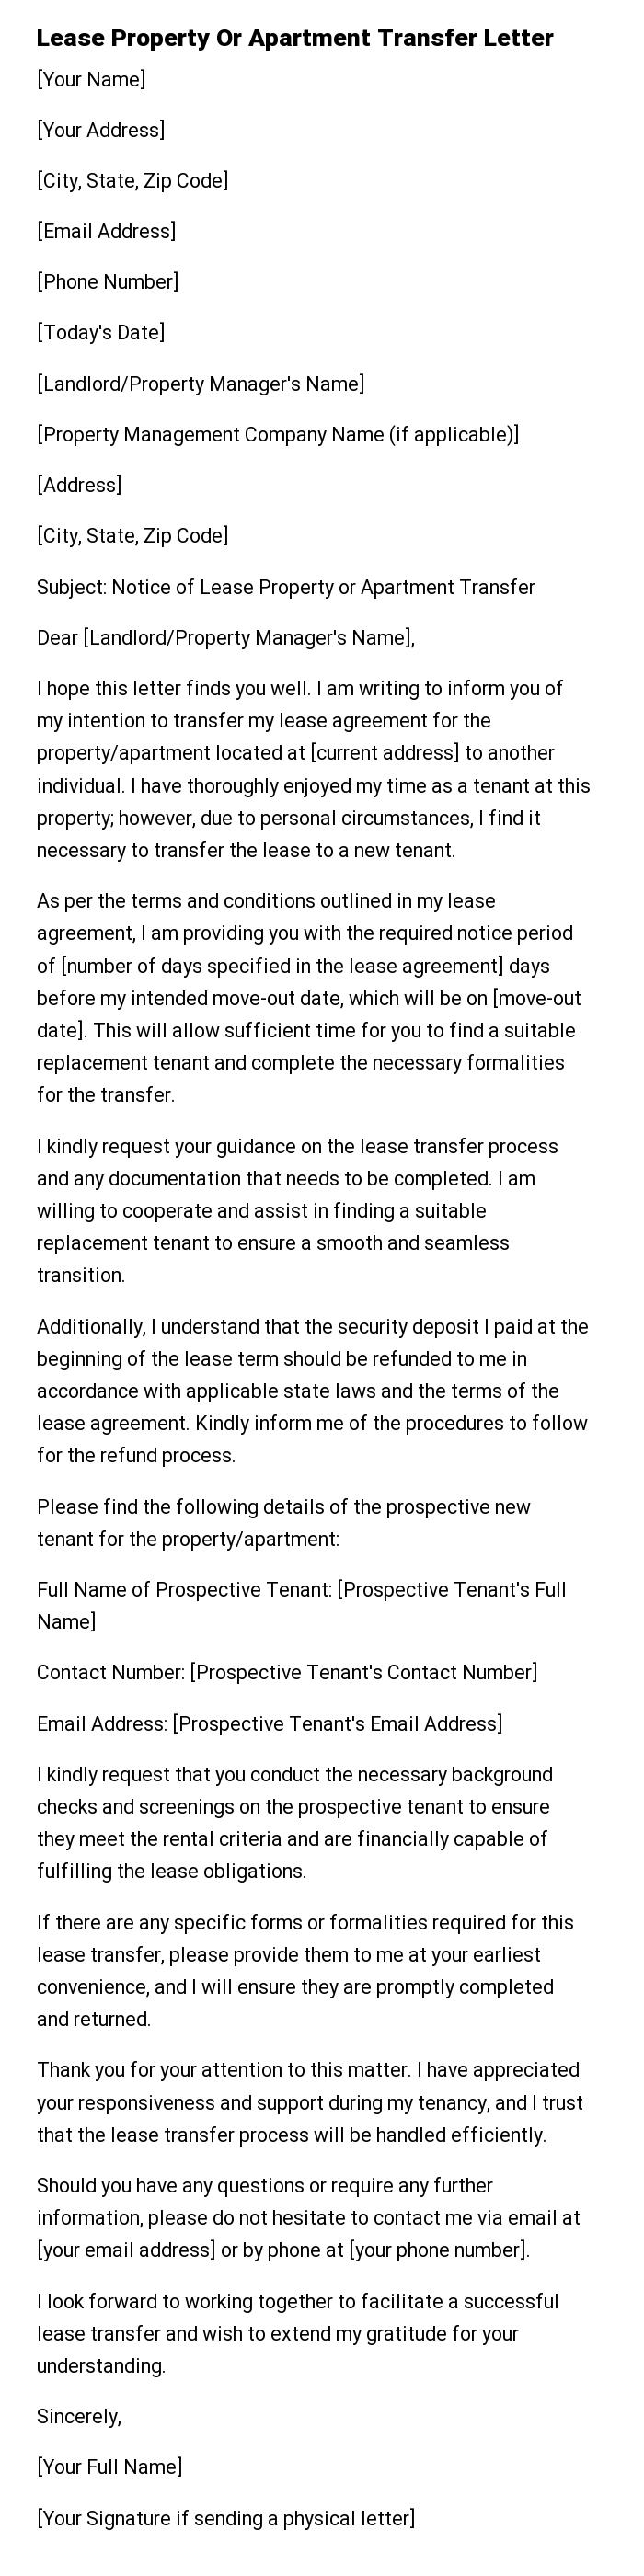 Lease Property Or Apartment Transfer Letter